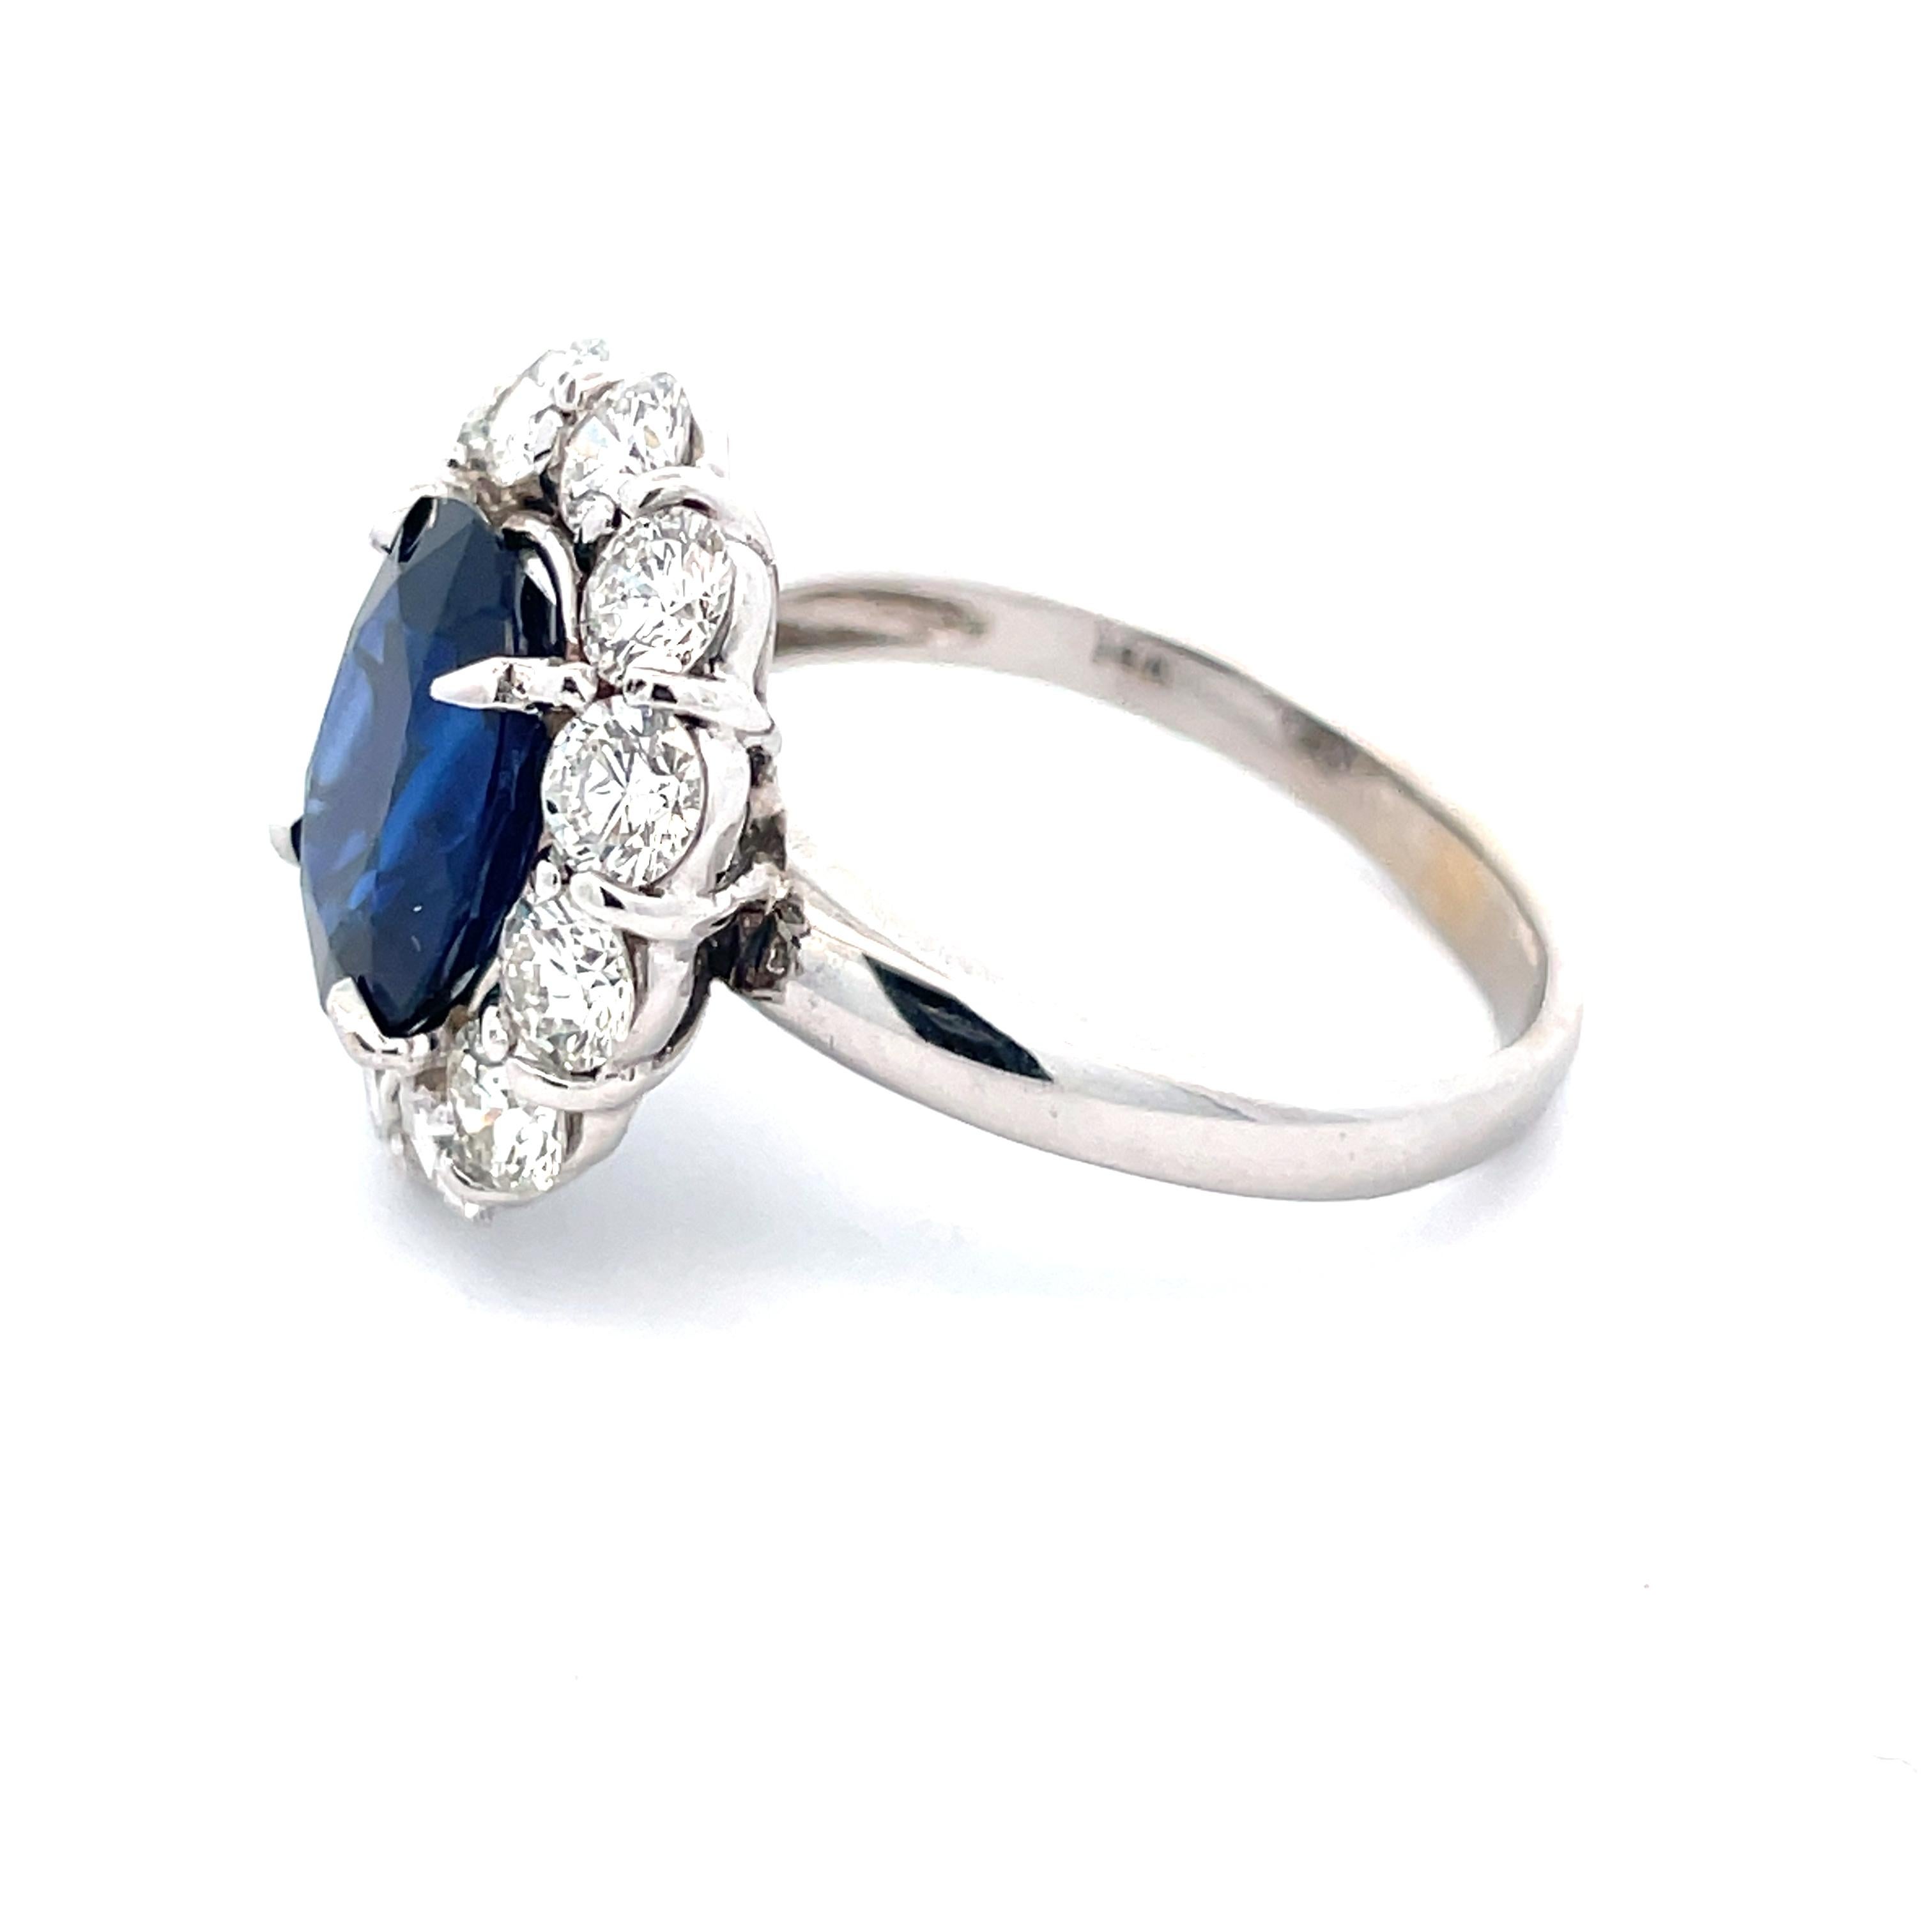 This 14k white gold Lady Di blue sapphire and diamond ring is a breathtaking, wearable piece of art. With 12 round cut, G/H color VS2 clarity diamonds totaling 2.16 tw, a white gold and a layered setting, this Lady Di ring naturally draws the eyes